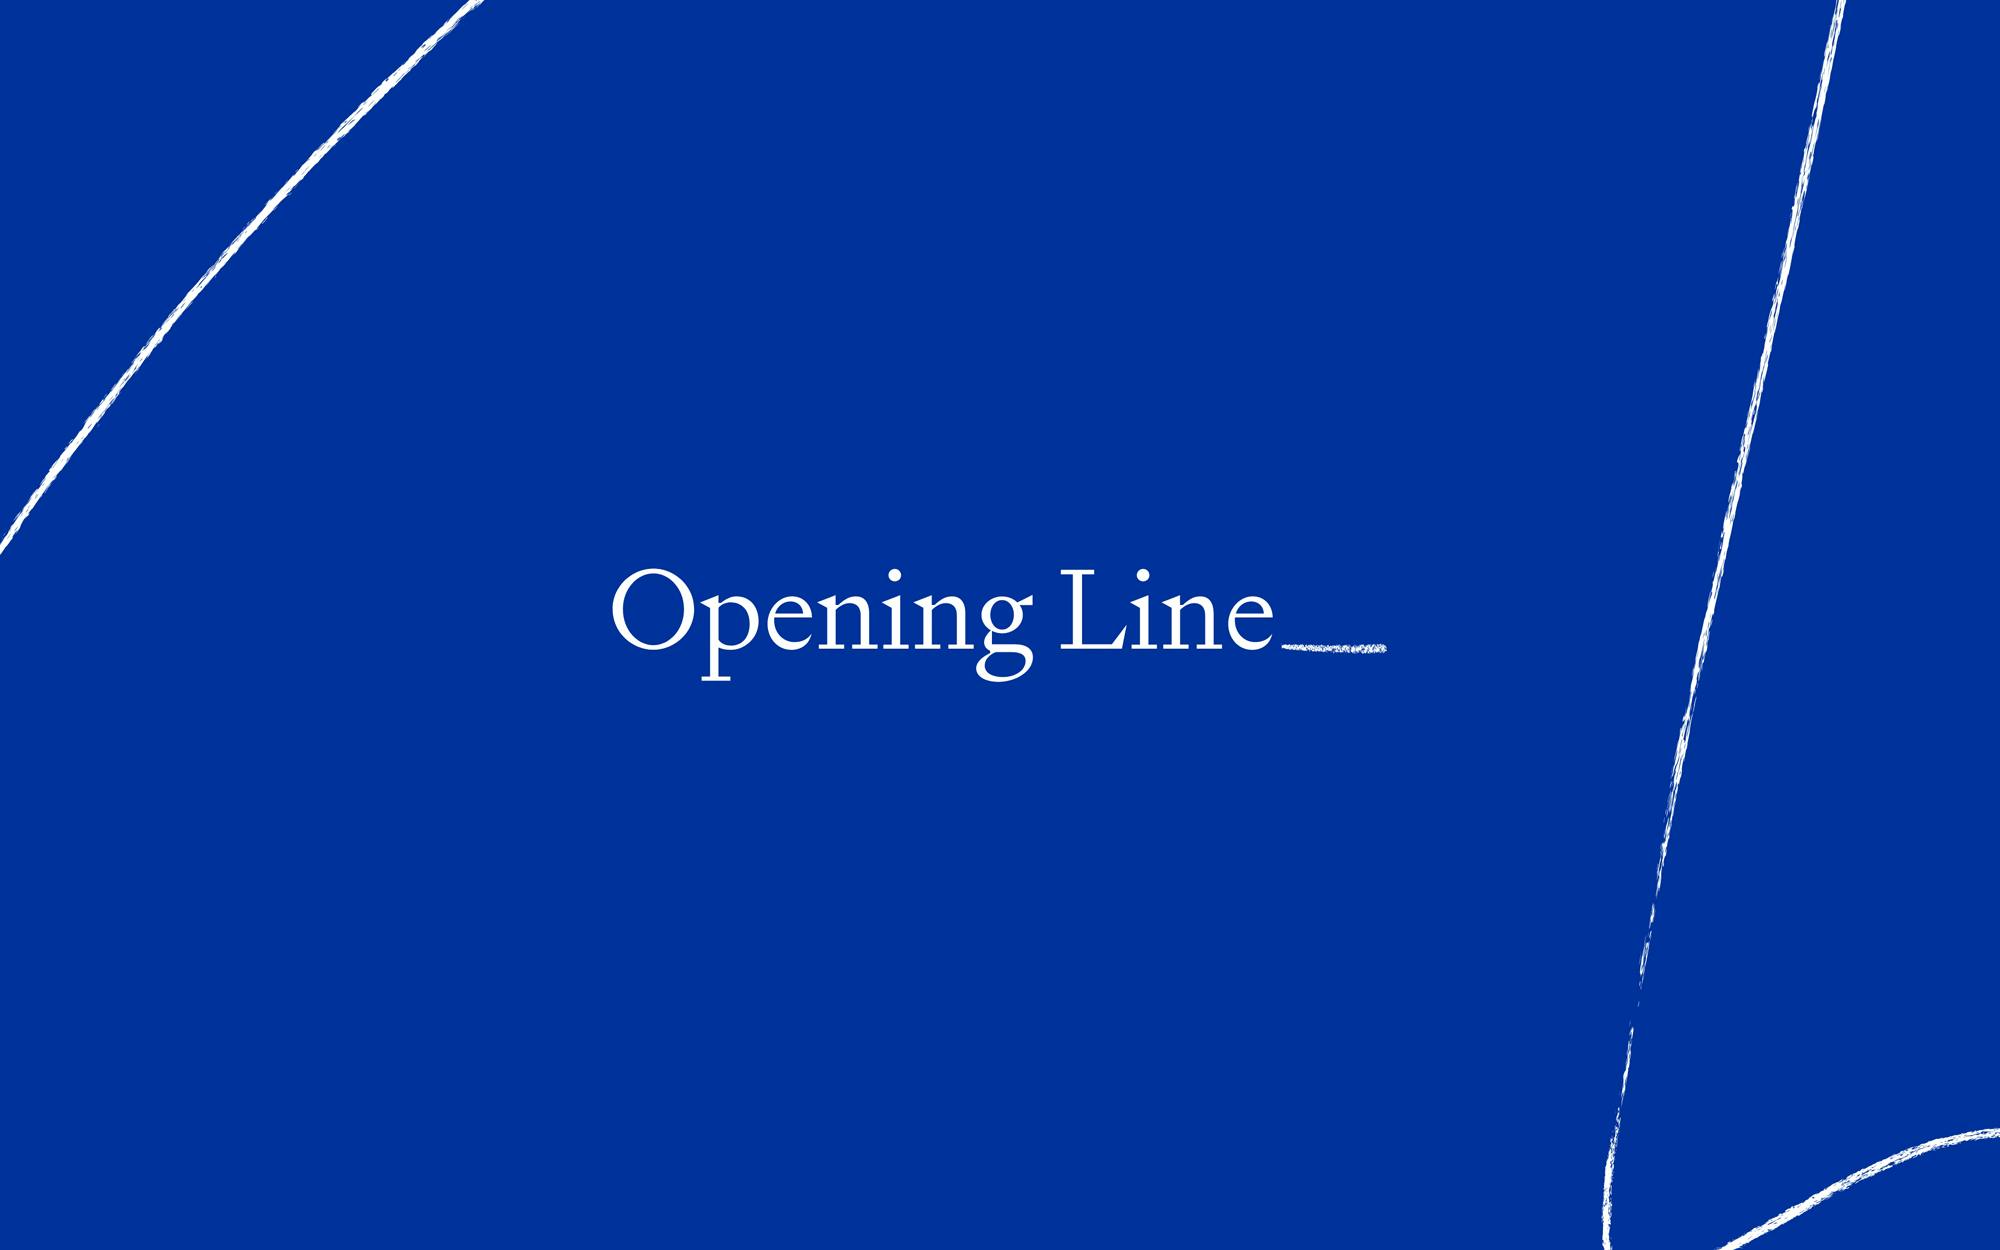 Brand Identity for Copywriters, Opening Line. Designed by Extract Studio